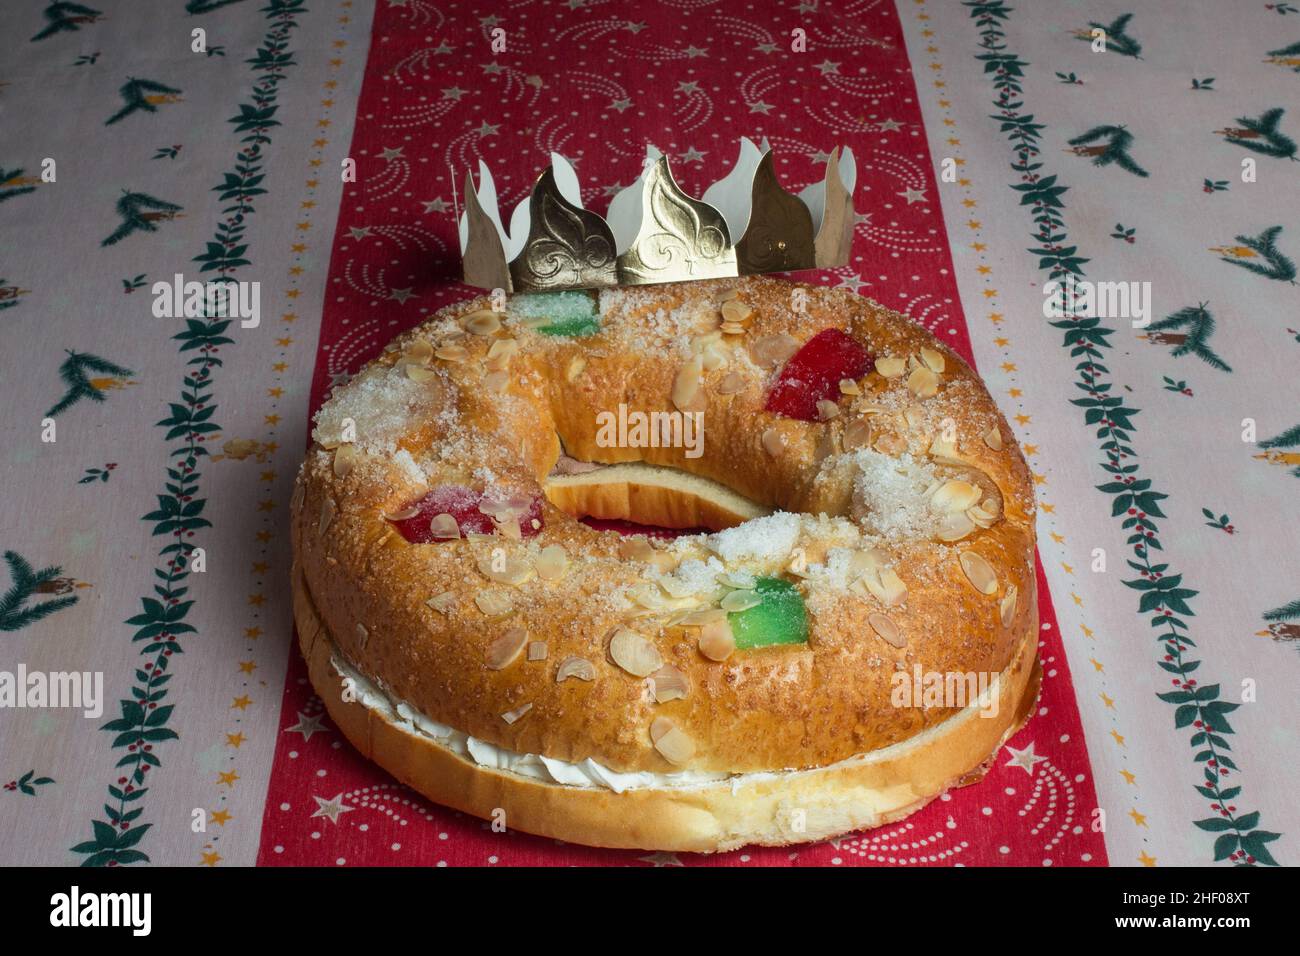 A large donut cake with a sweet creamy filling inside, almonds, candied fruit adorning the top with a crown of kings on a tablecloth decorated with Ch Stock Photo